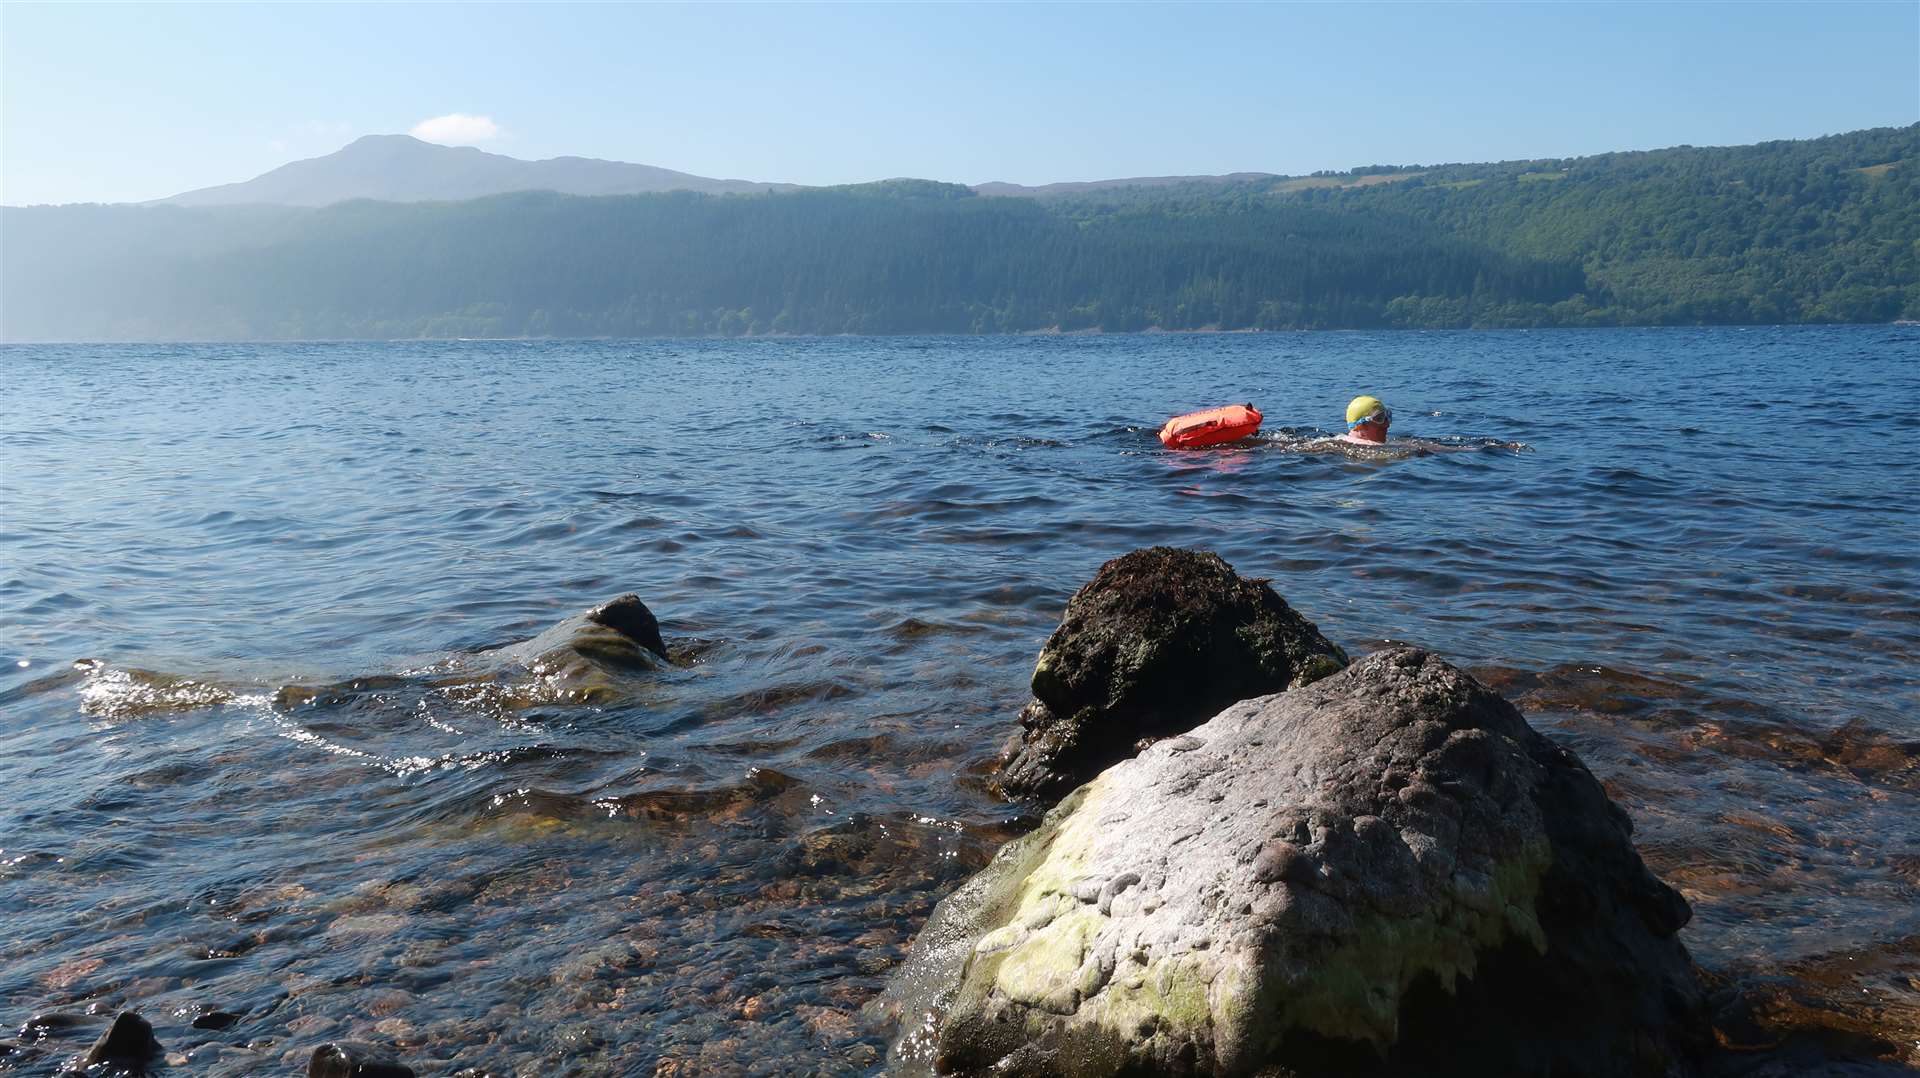 John swimming in Loch Ness with Meall Fuar-mhonaidh as the backdrop.